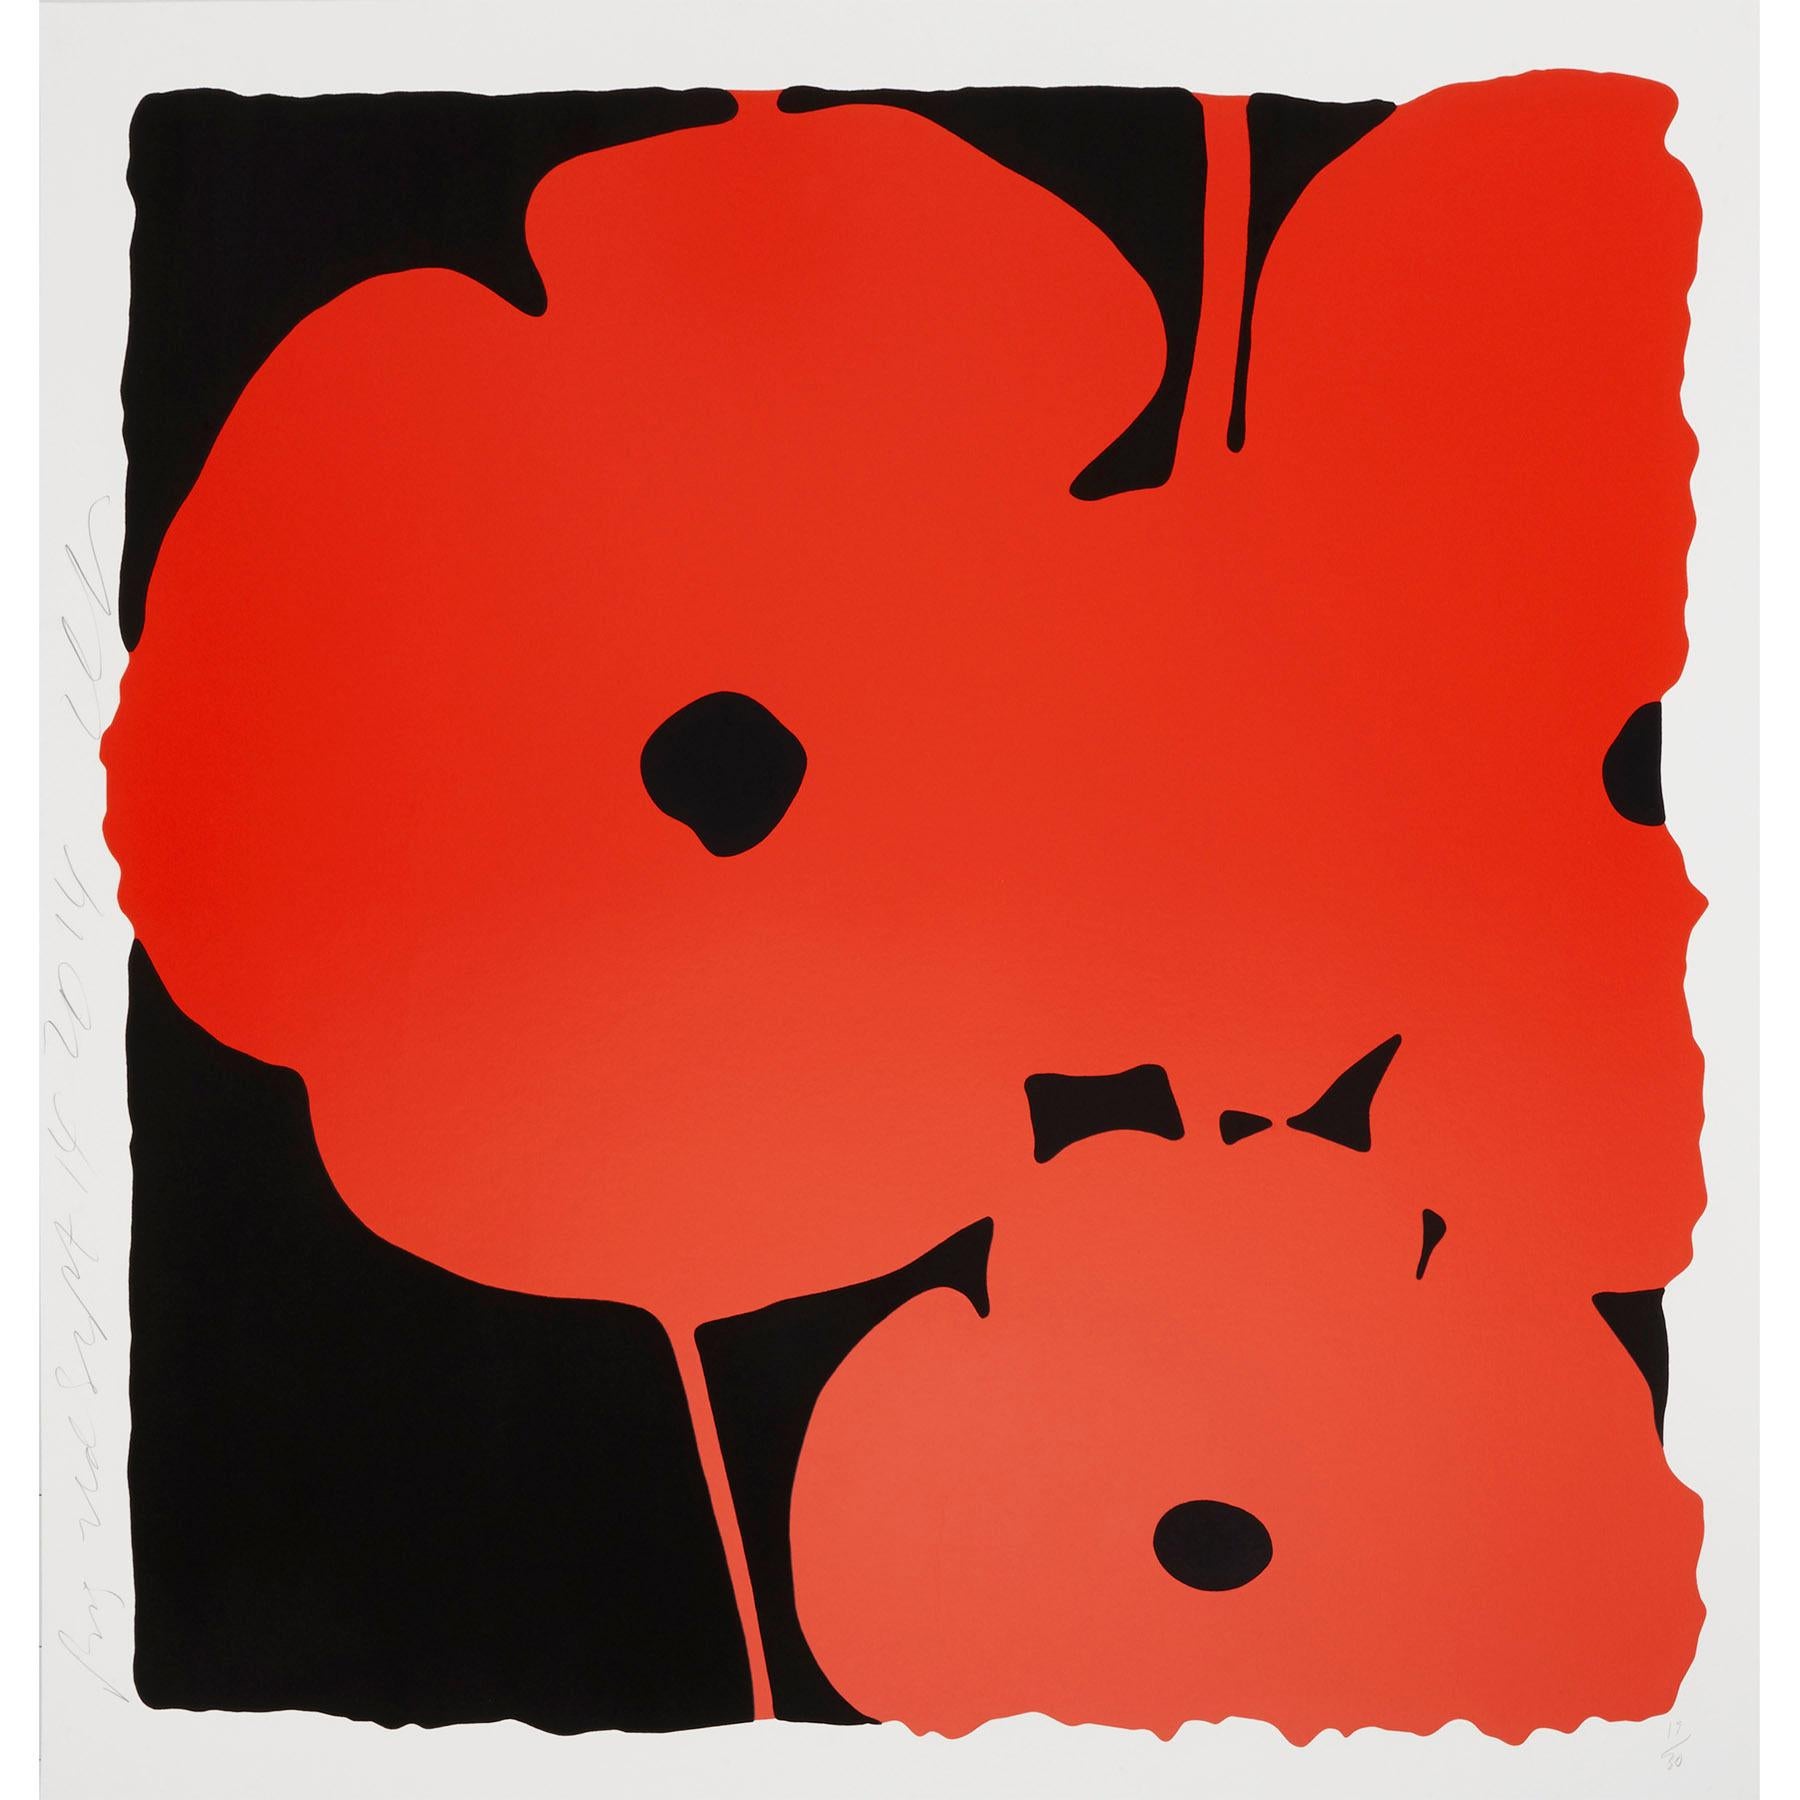 Big Poppies - Contemporary, 21st Century, Silkscreen, Poppies, Limited Edition  - Beige Figurative Sculpture by Donald Sultan